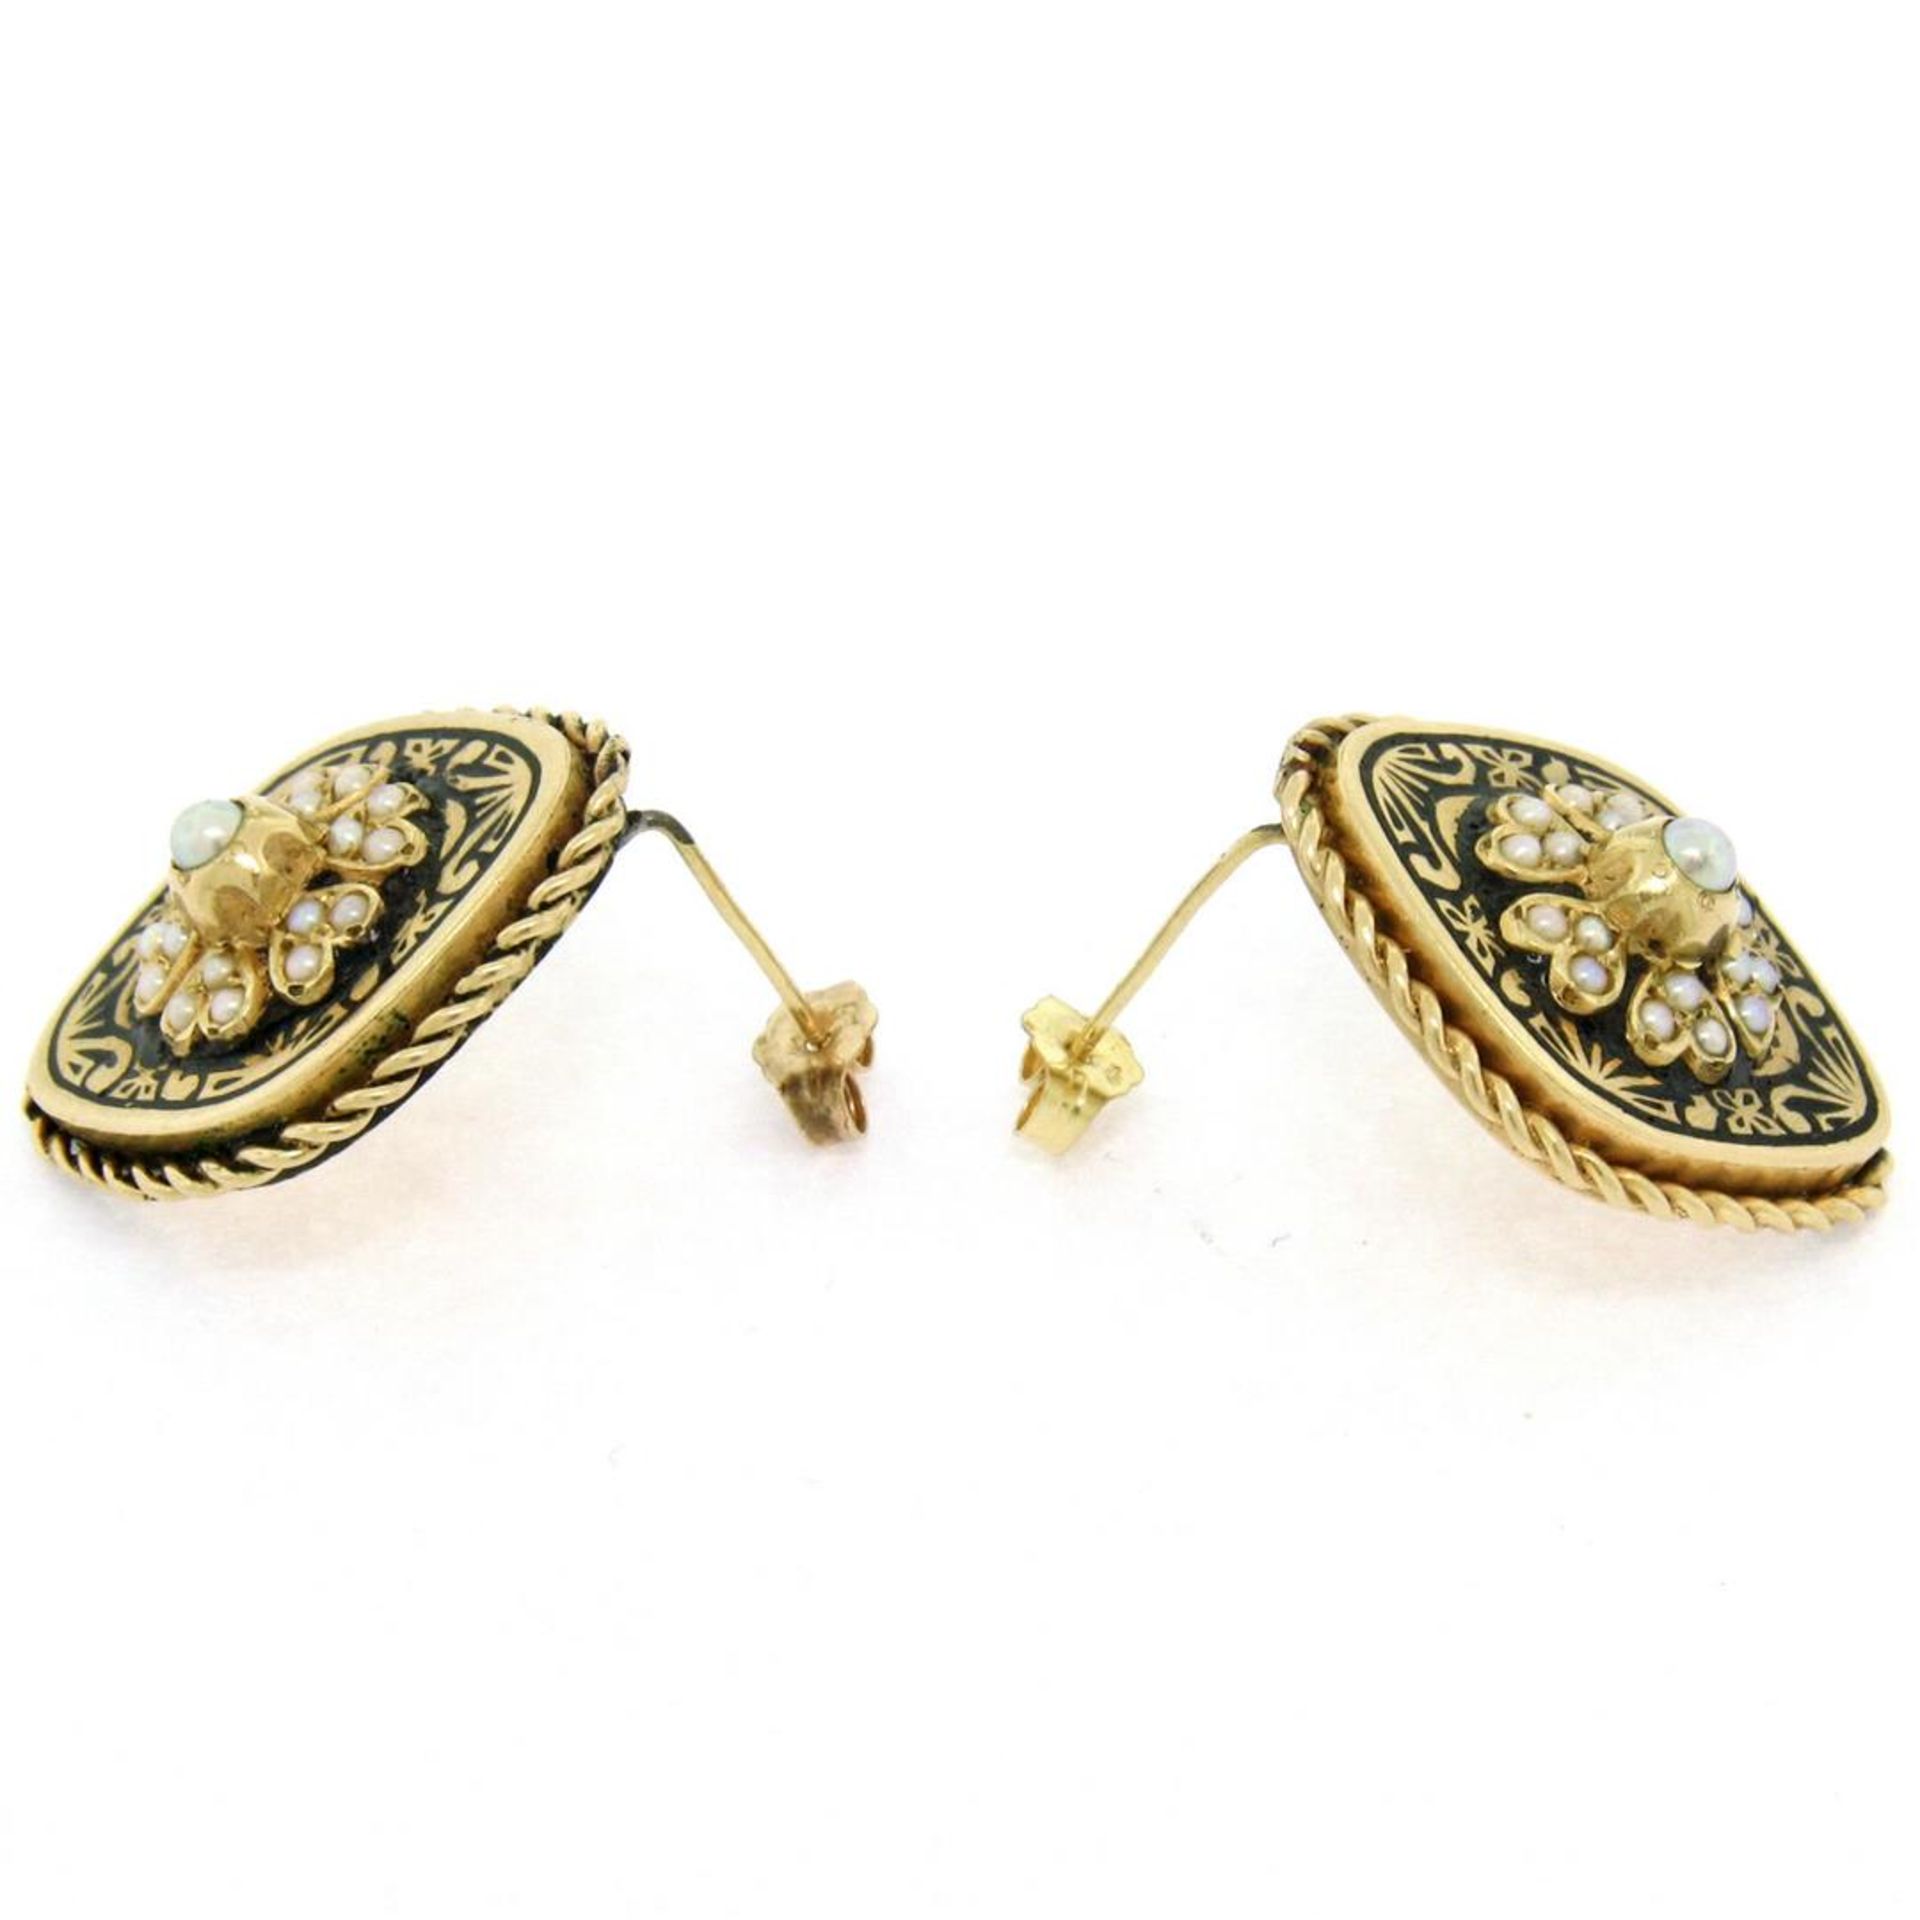 Antique Victorian 14K Gold Seed Pearl & Black Enamel Marquise Panel Earrings - Image 5 of 5